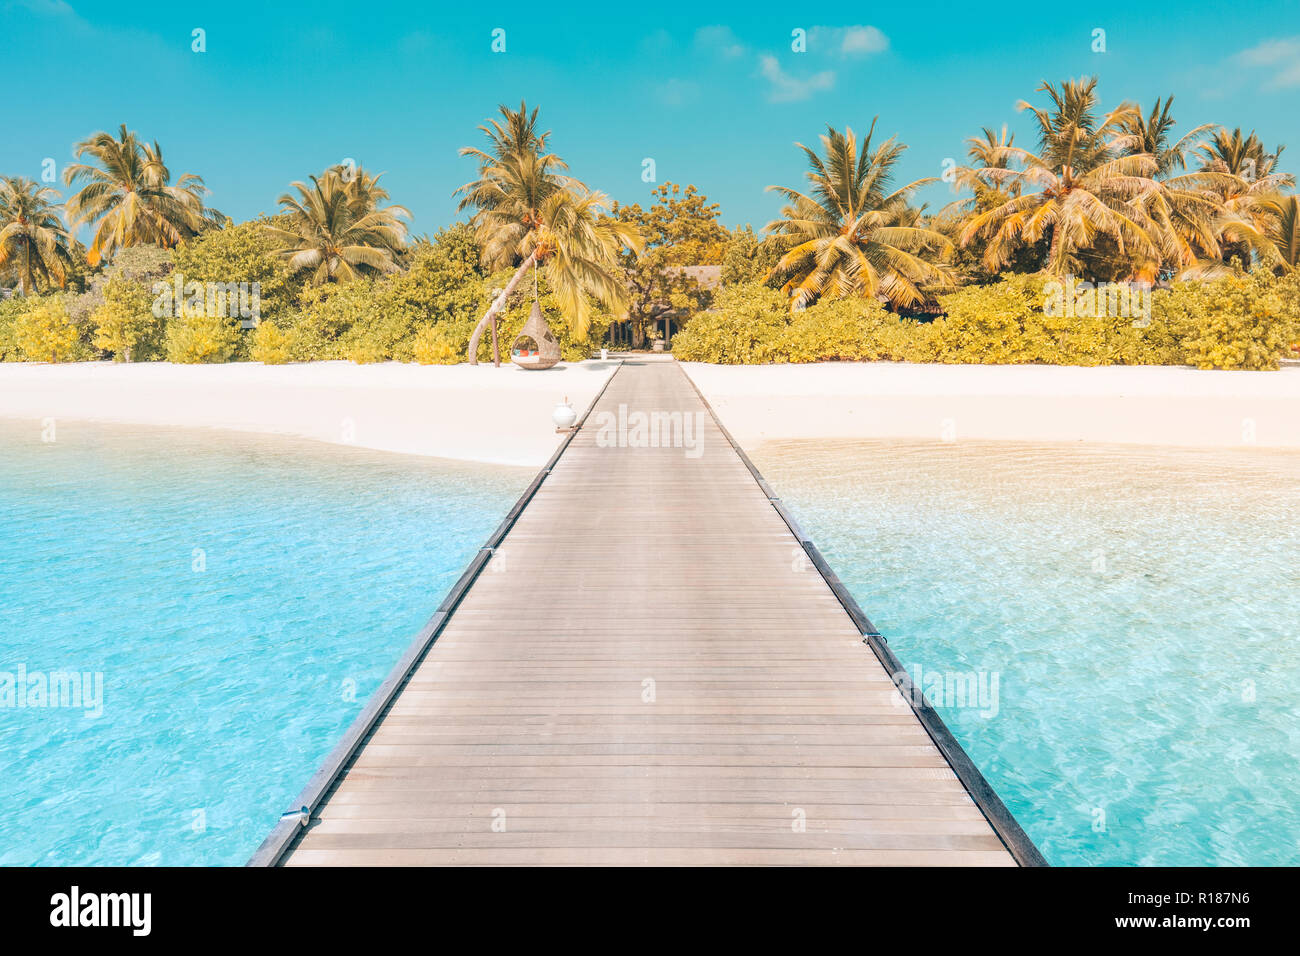 Perfect tropical scenery, wooden pier or jetty, white sand and blue sea, exotic tropical beach banner. Island landscape Stock Photo